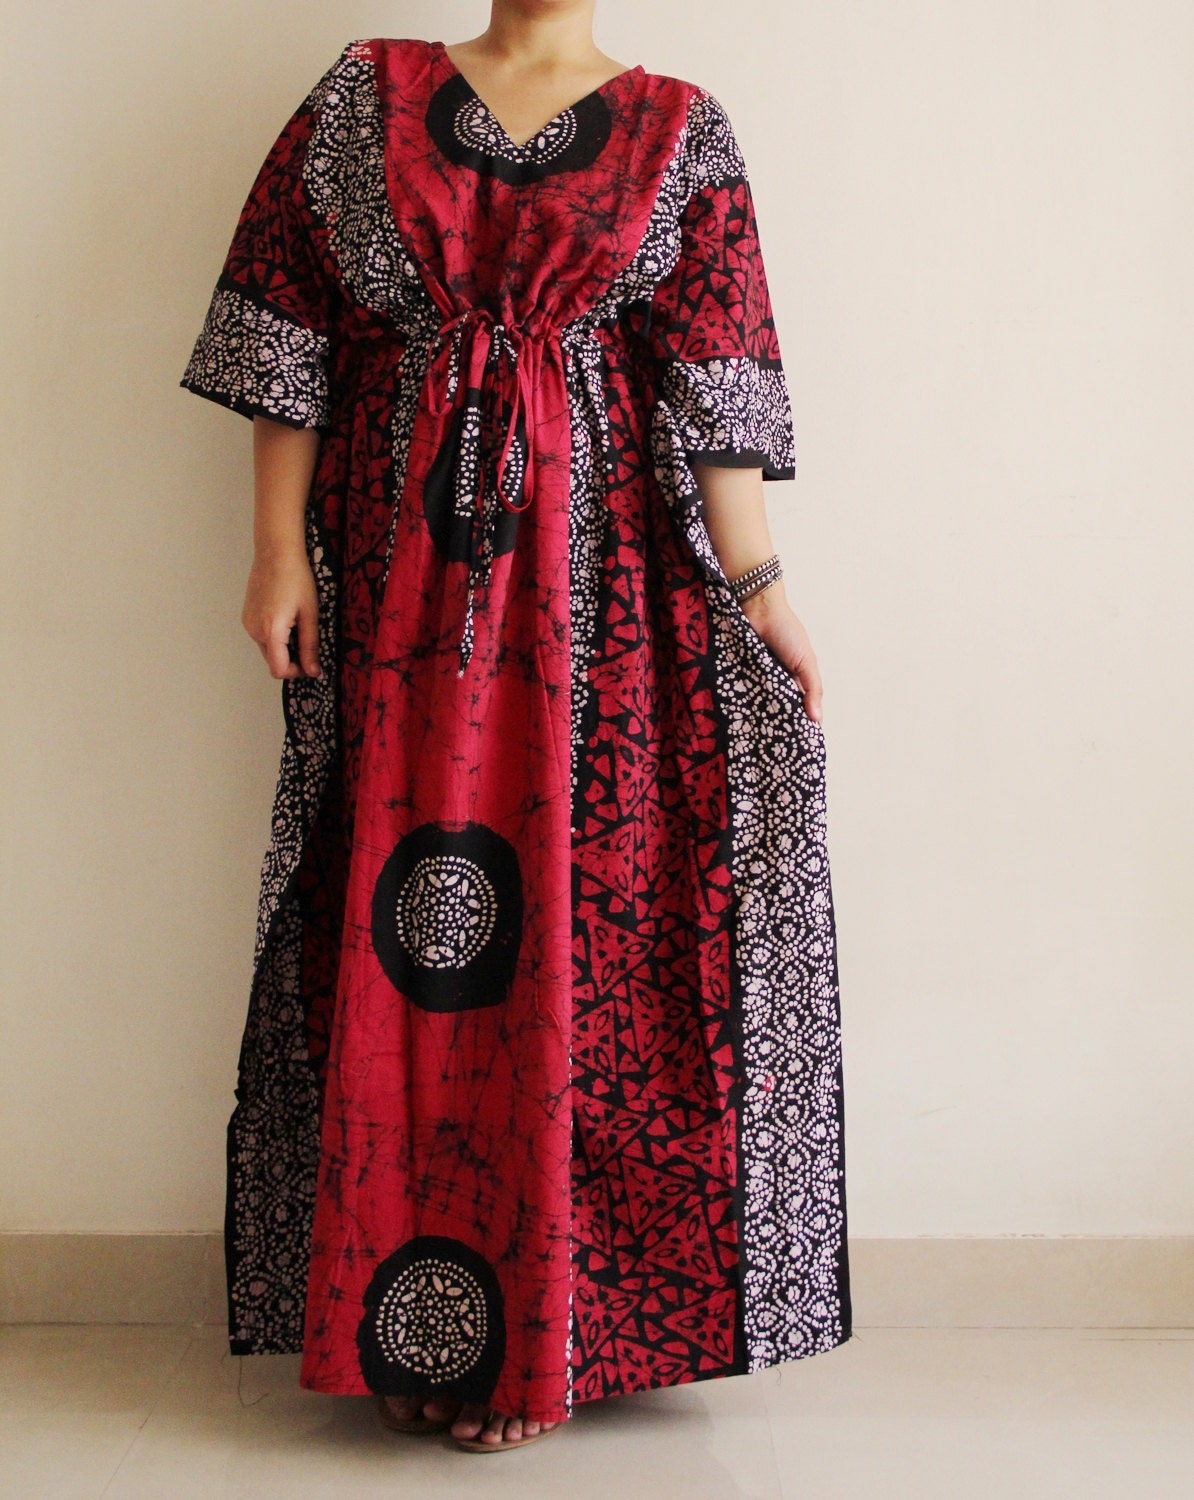 PLUS SIZE Caftan Indian Kaftan gifts for her by ADifferentWeave